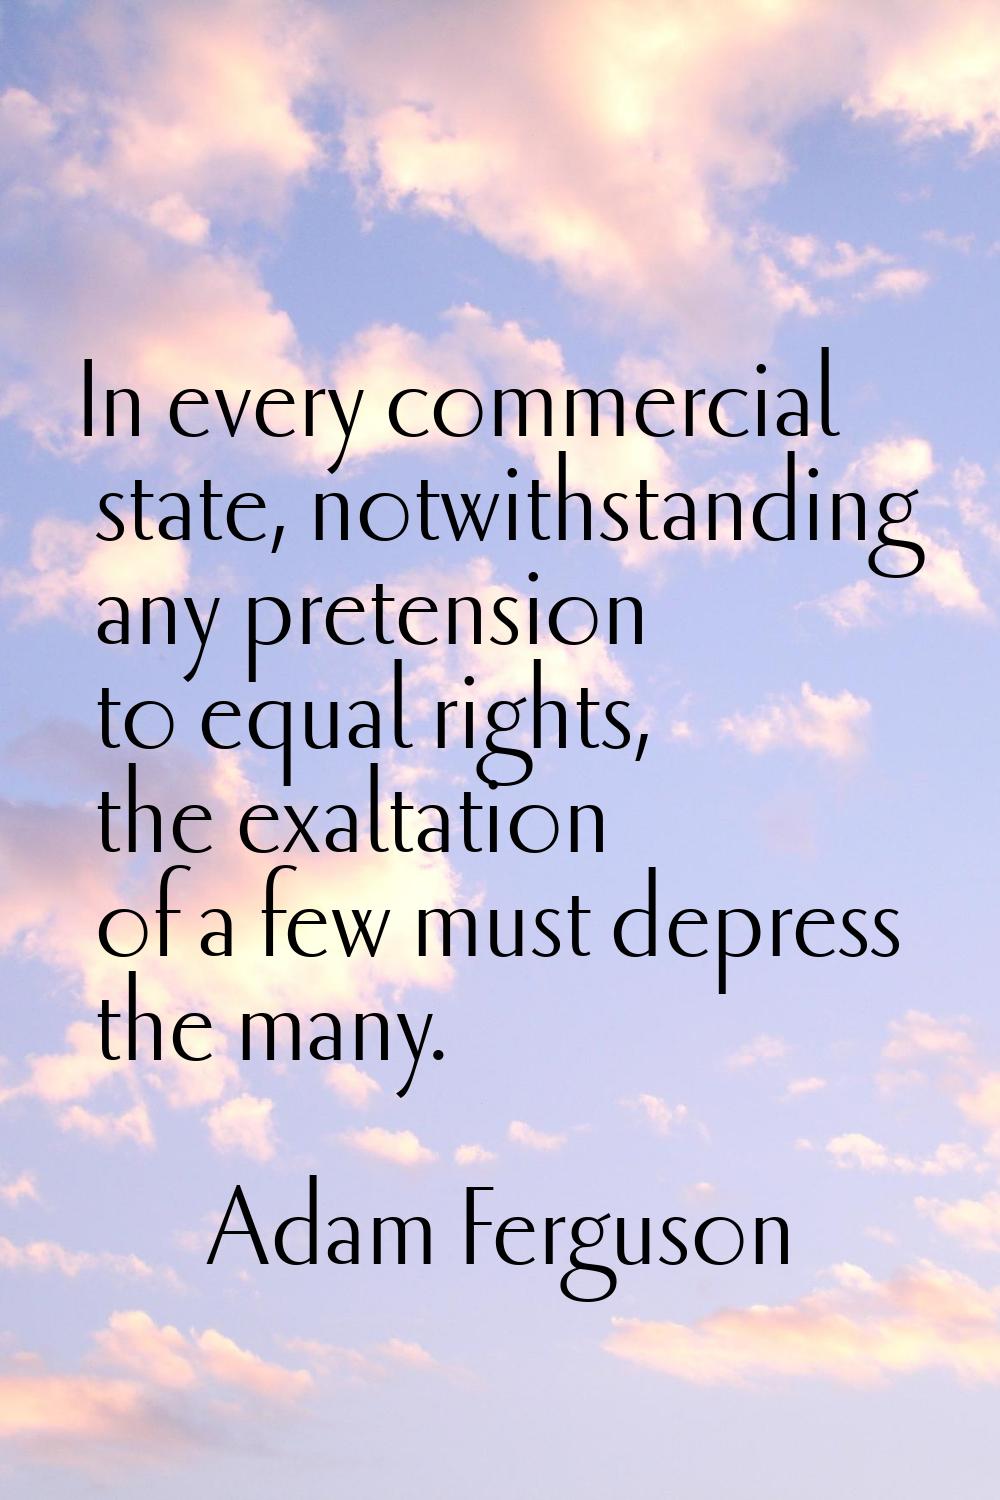 In every commercial state, notwithstanding any pretension to equal rights, the exaltation of a few 